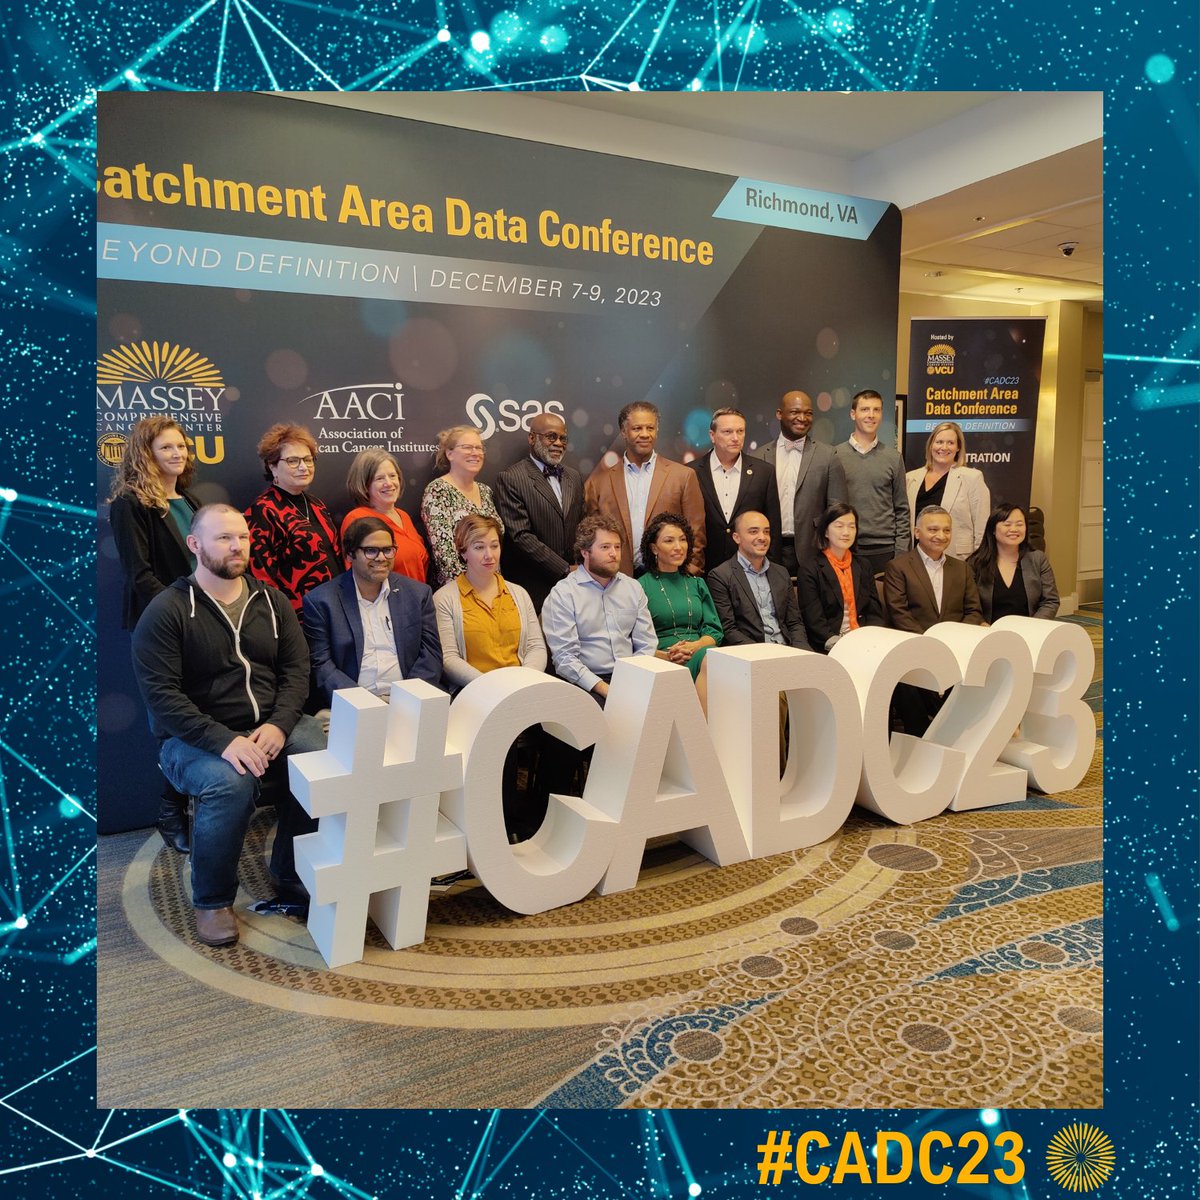 And that's wrap for today! Thank you to all the presenters and audience members for a day full of insightful commentary, thought provoking questions, and inspiring moments. See you tomorrow for the last day of #CADC23 #OneTeamOneFight!